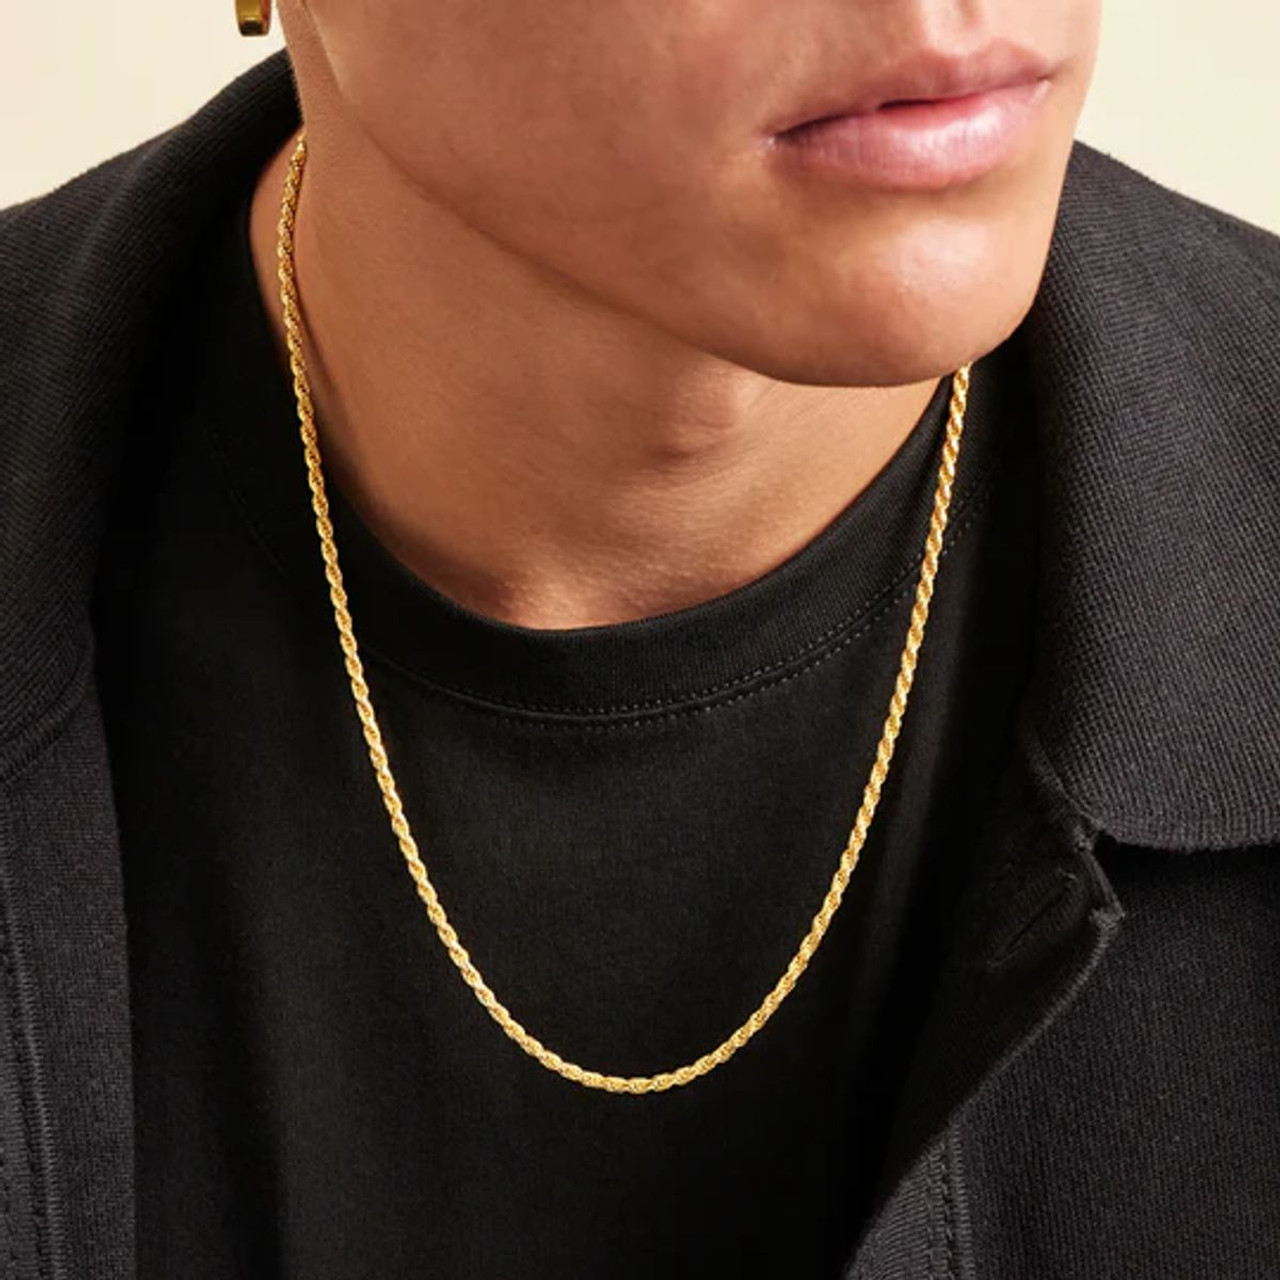 Men's 14K Gold Filled 24-Inch 3mm Rope Chain product image